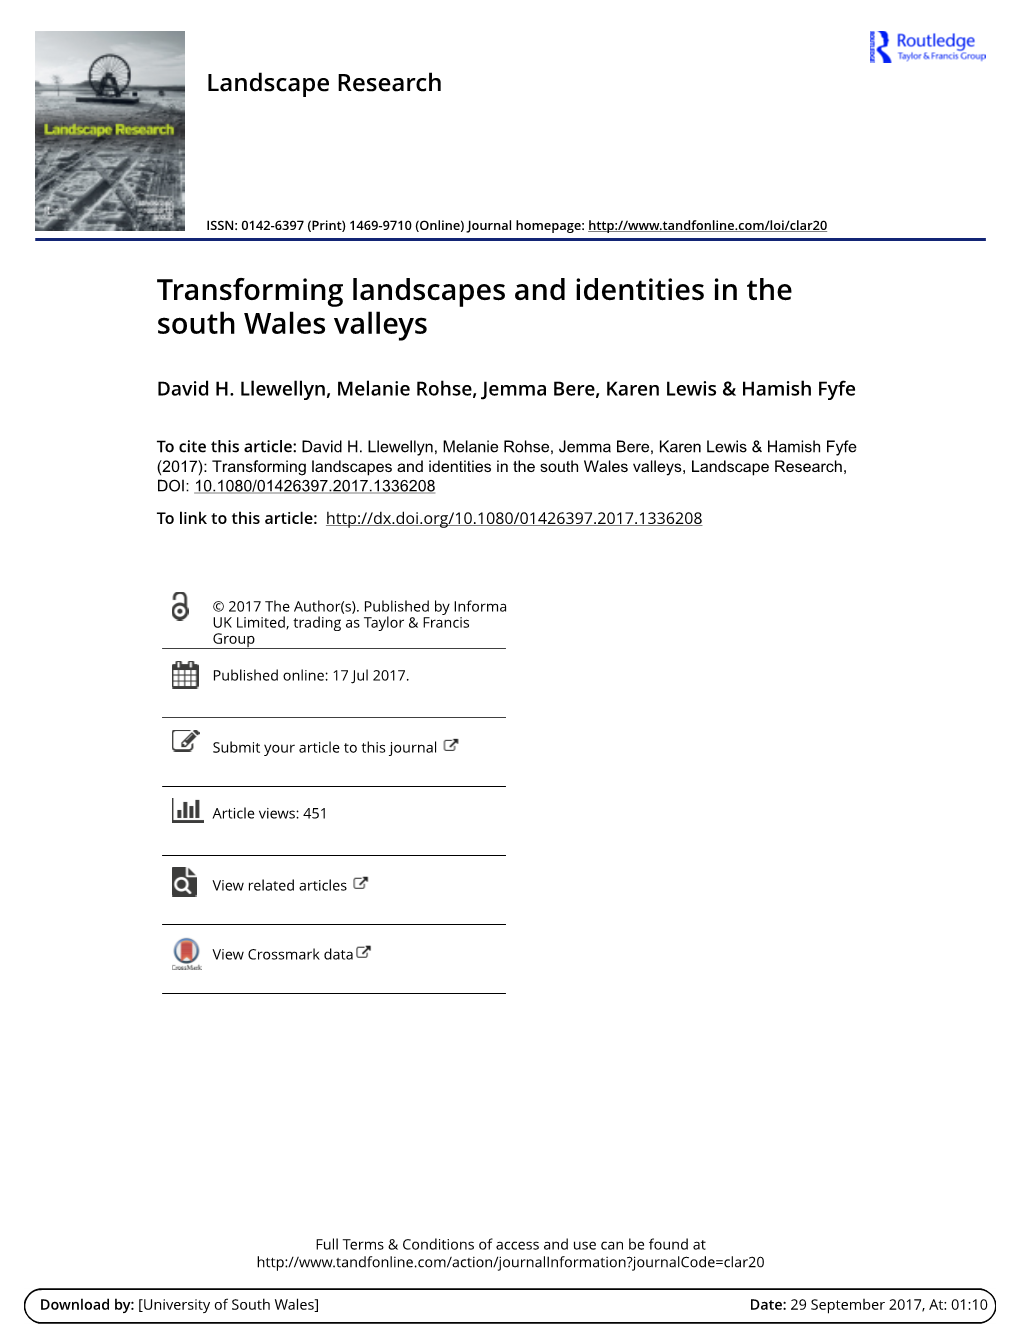 Transforming Landscapes and Identities in the South Wales Valleys